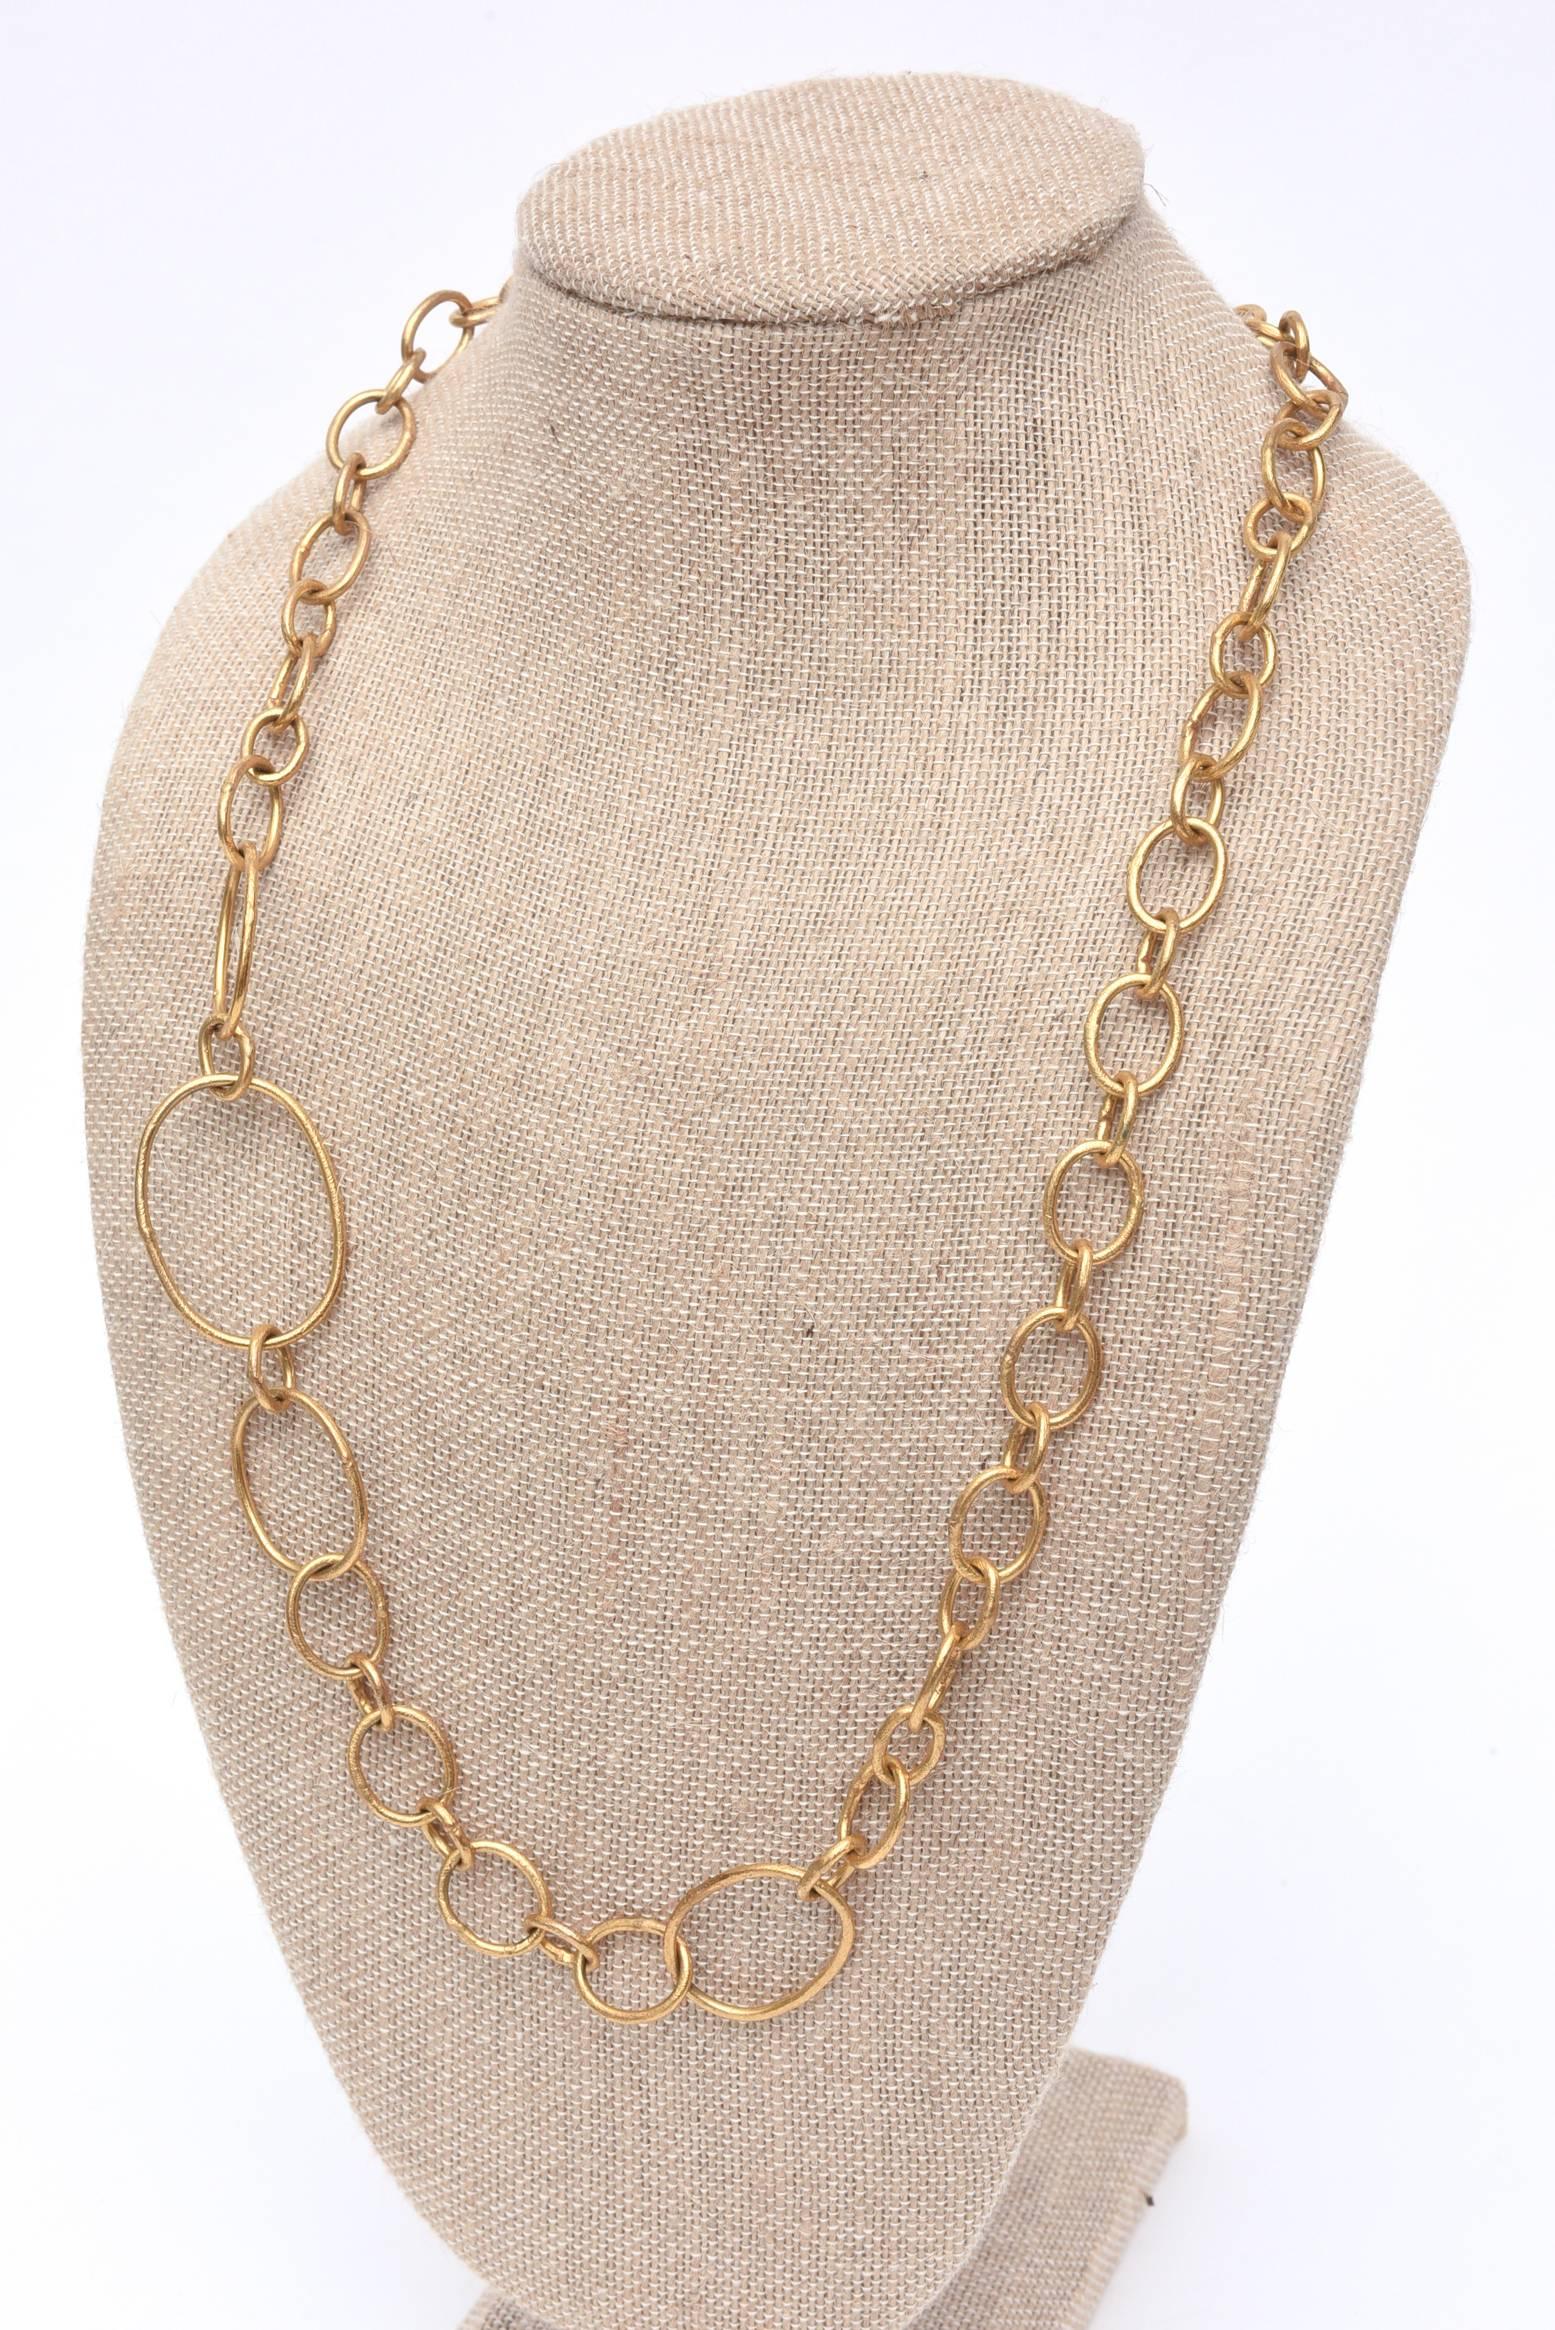 Women's Alexis Bittar Link Chain Necklace For Sale